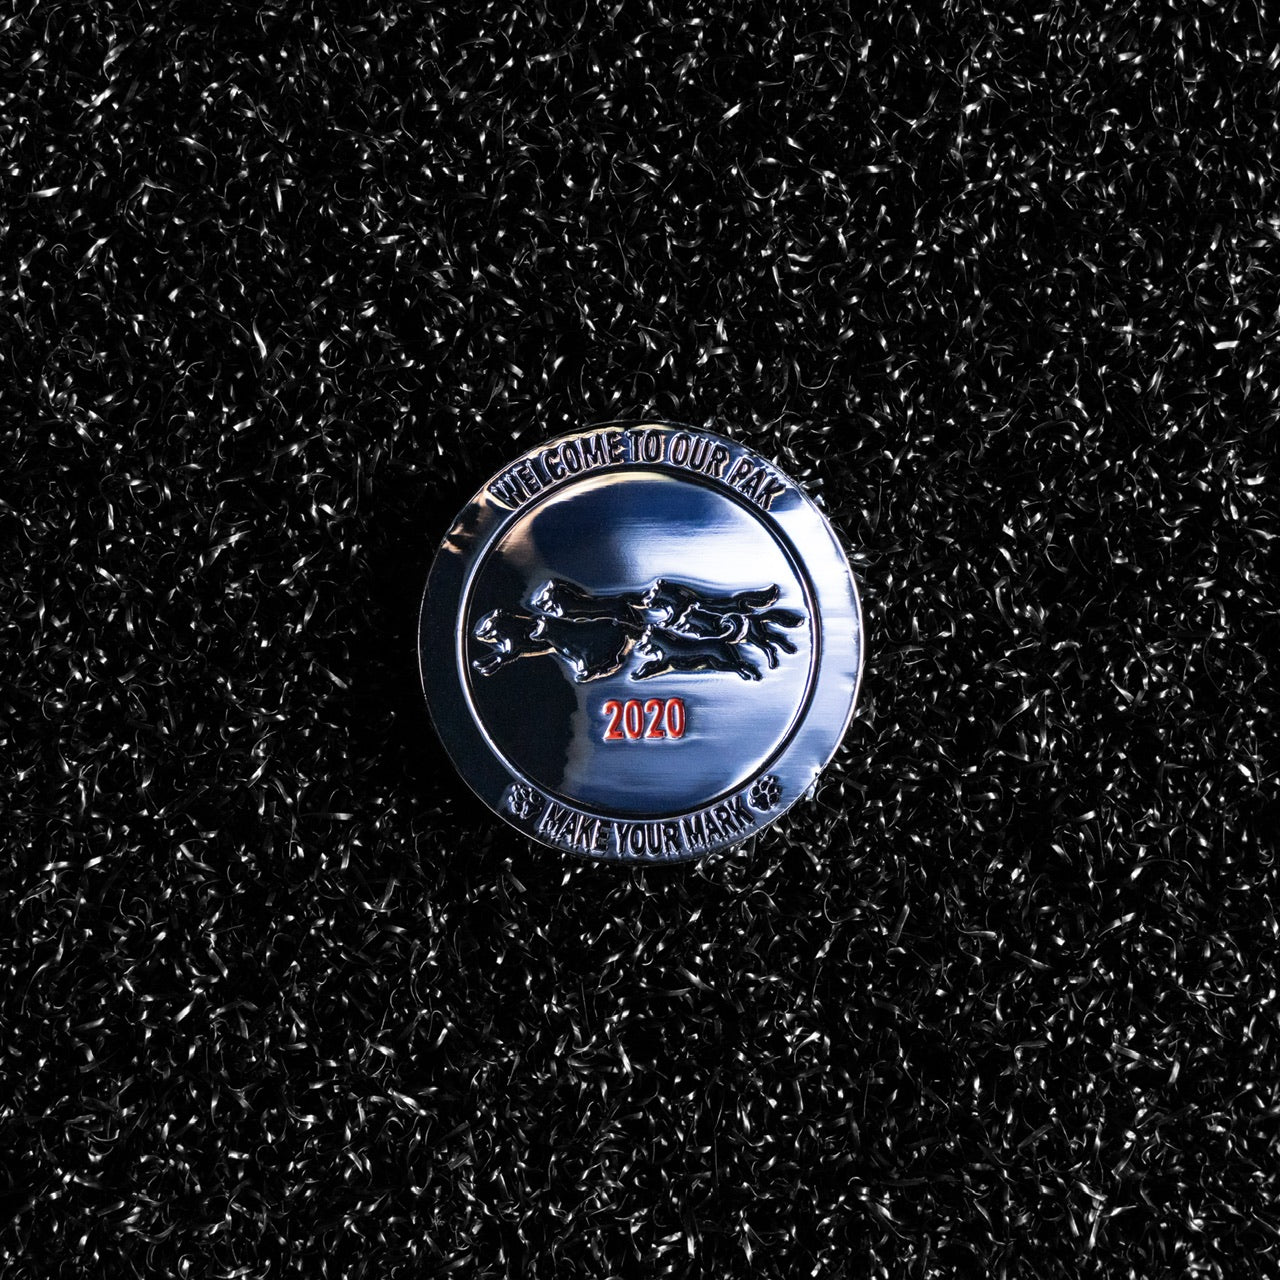 2020 Welcome To The Pak Challenge Coin